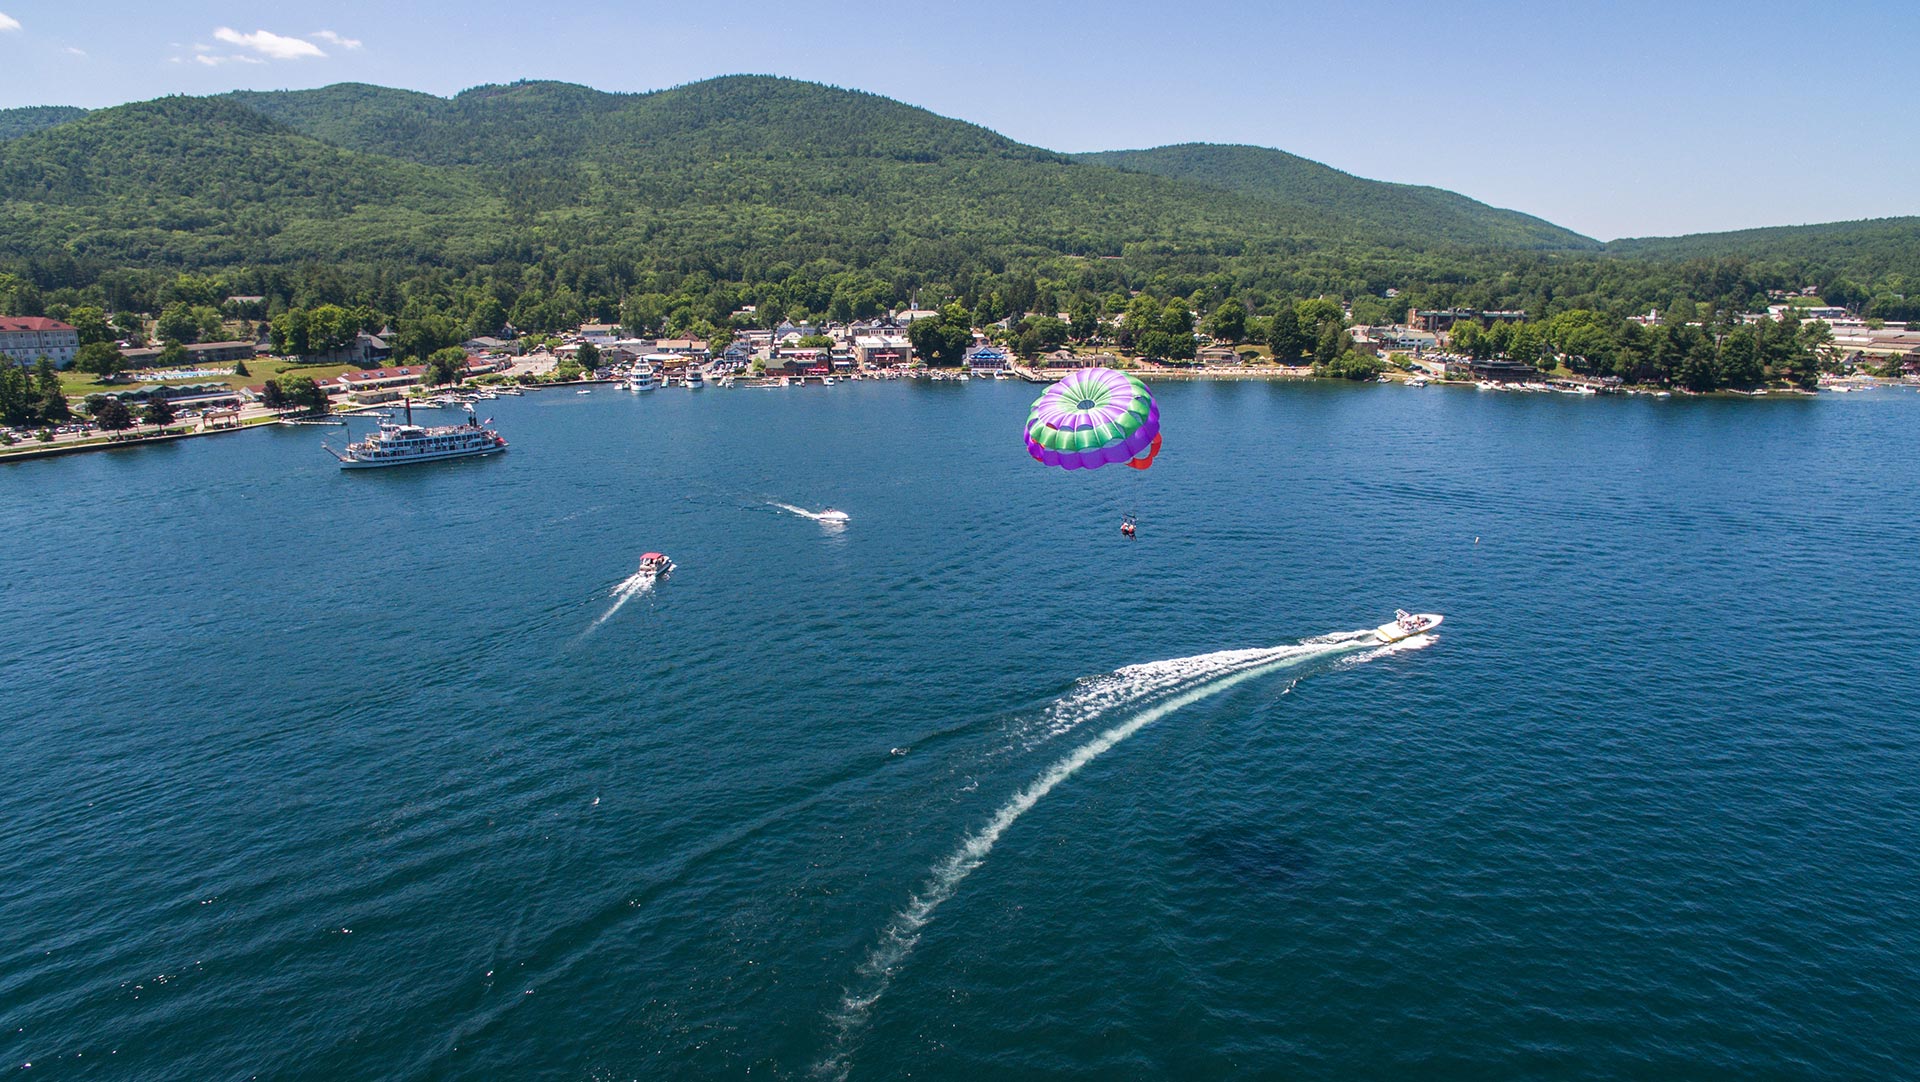 Parasailers during the summer on Lake George